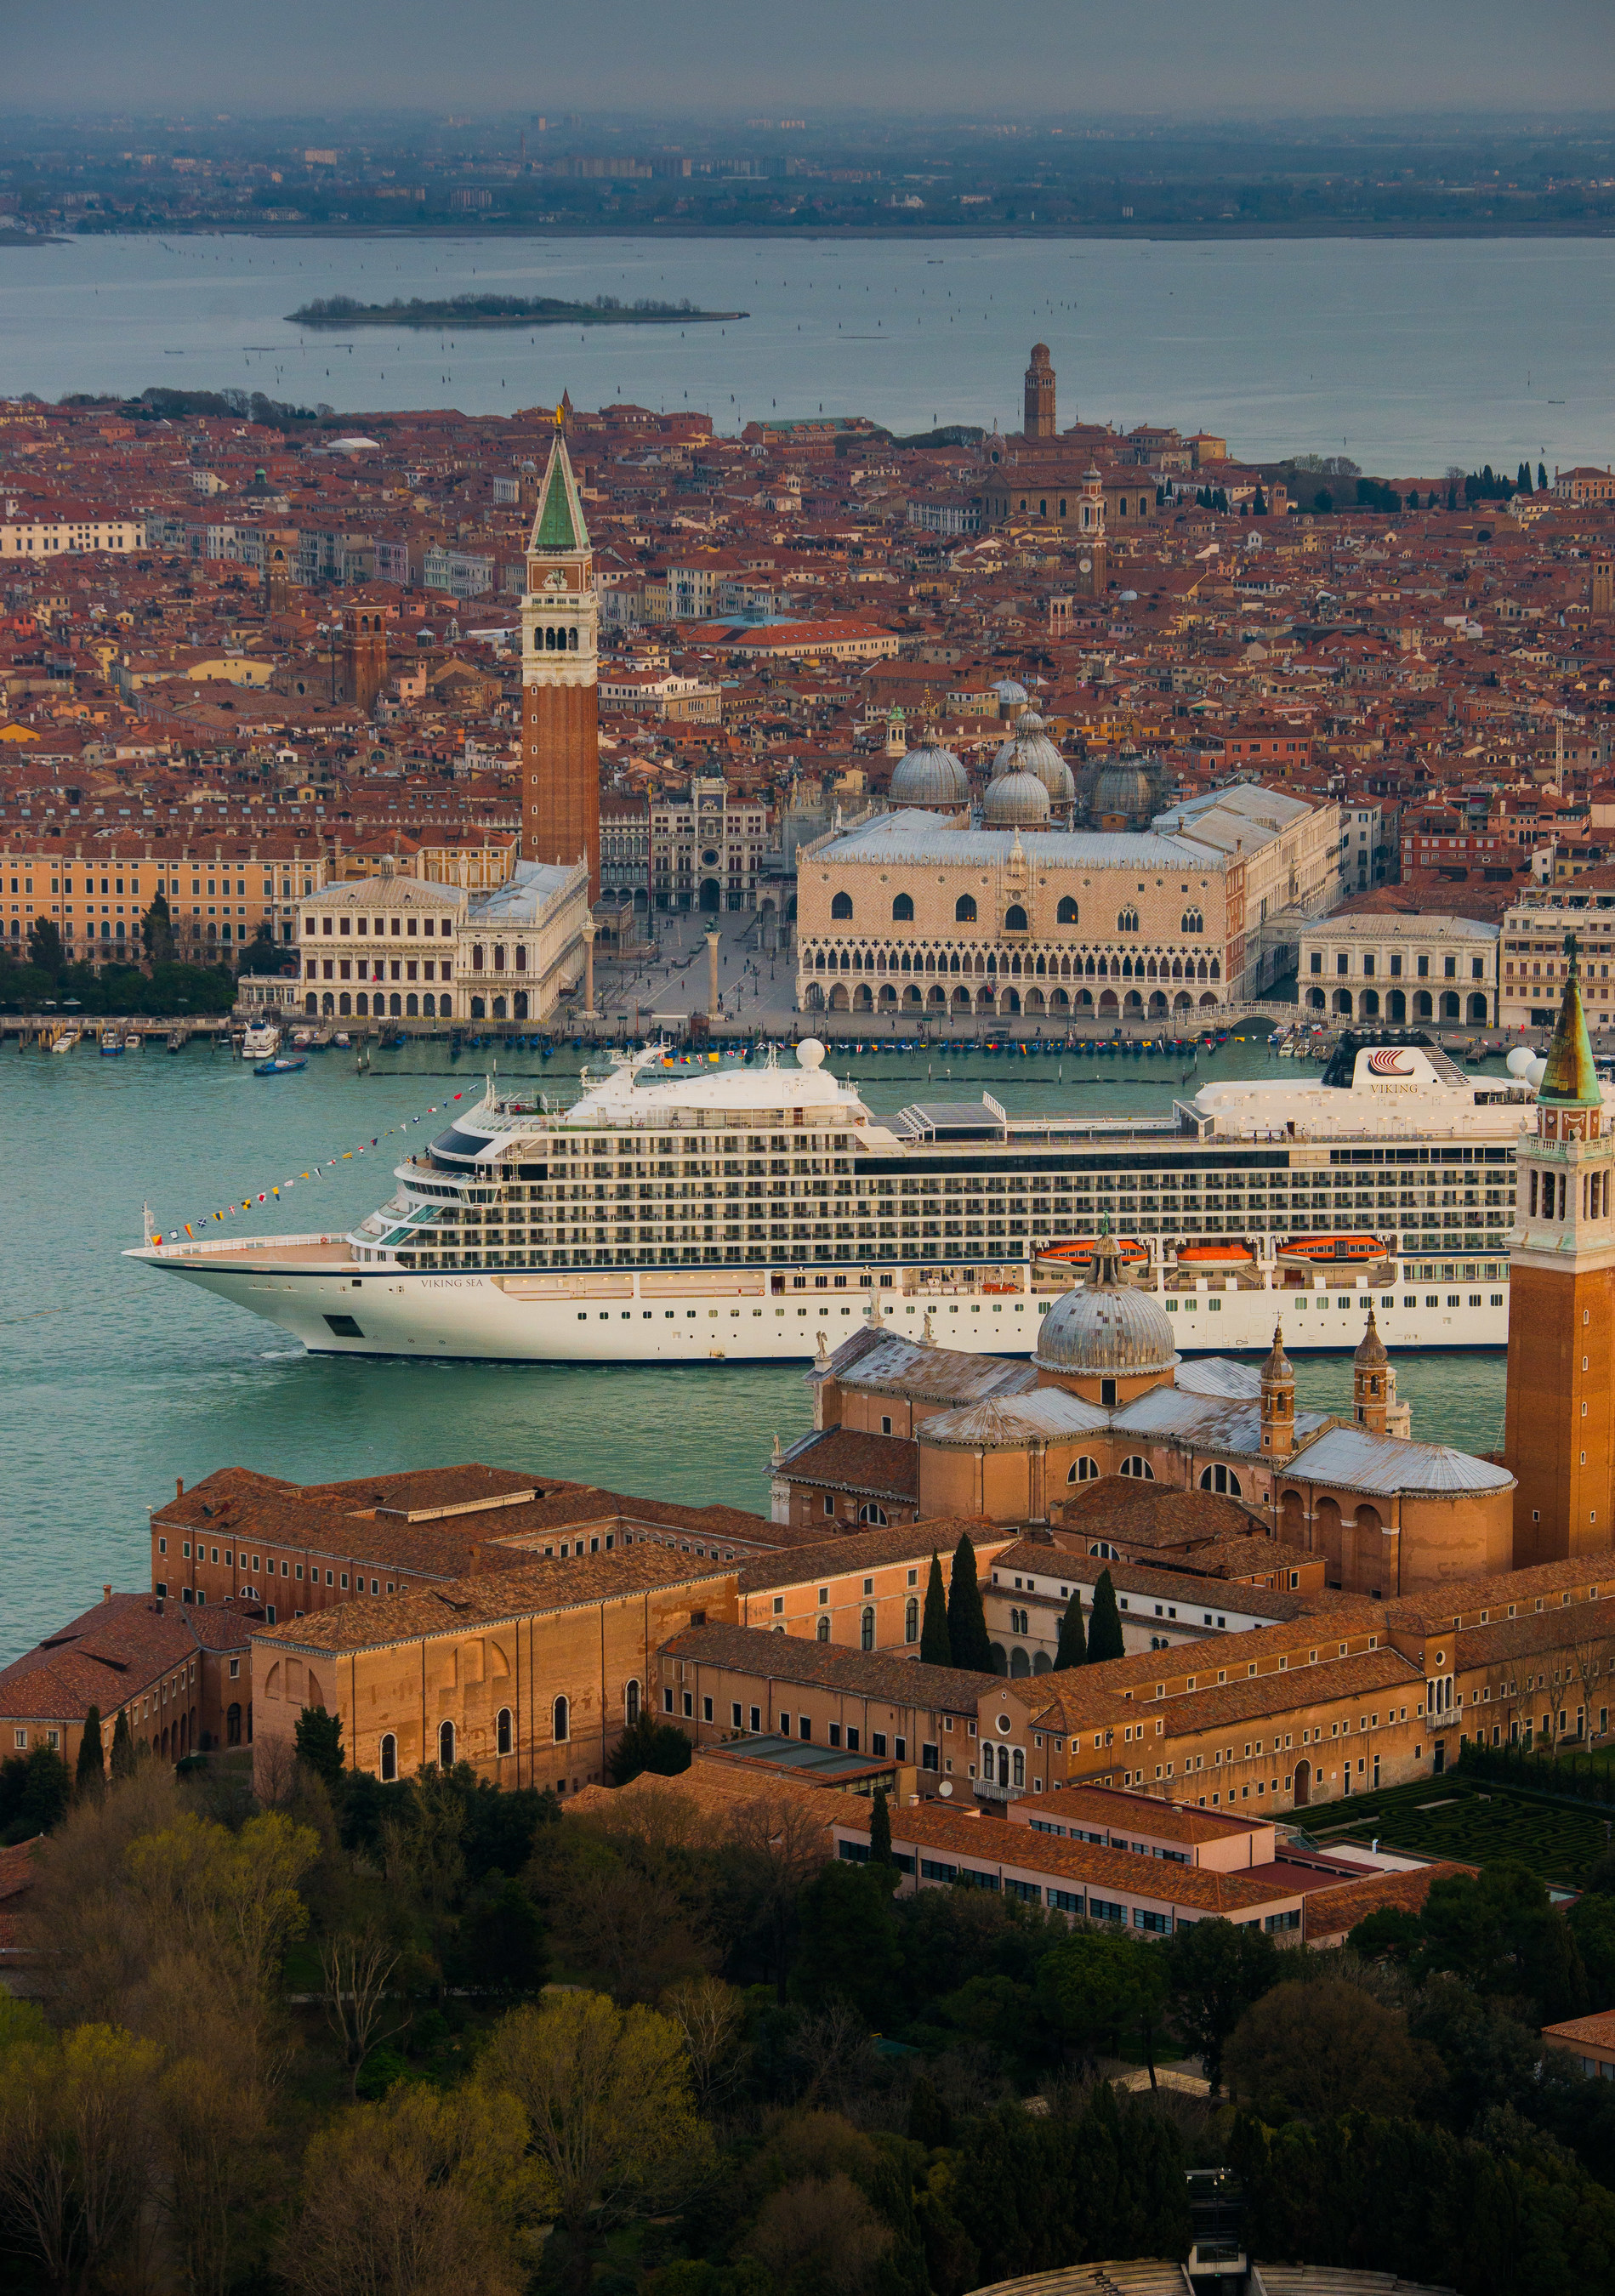 Viking Sea, the second ship from Viking Ocean Cruises, seen arriving in Venice, Italy. The 930-passenger ship is now on its maiden voyage and will be officially christened in London on May 5. Visit www.vikingoceancruises.com for more information.